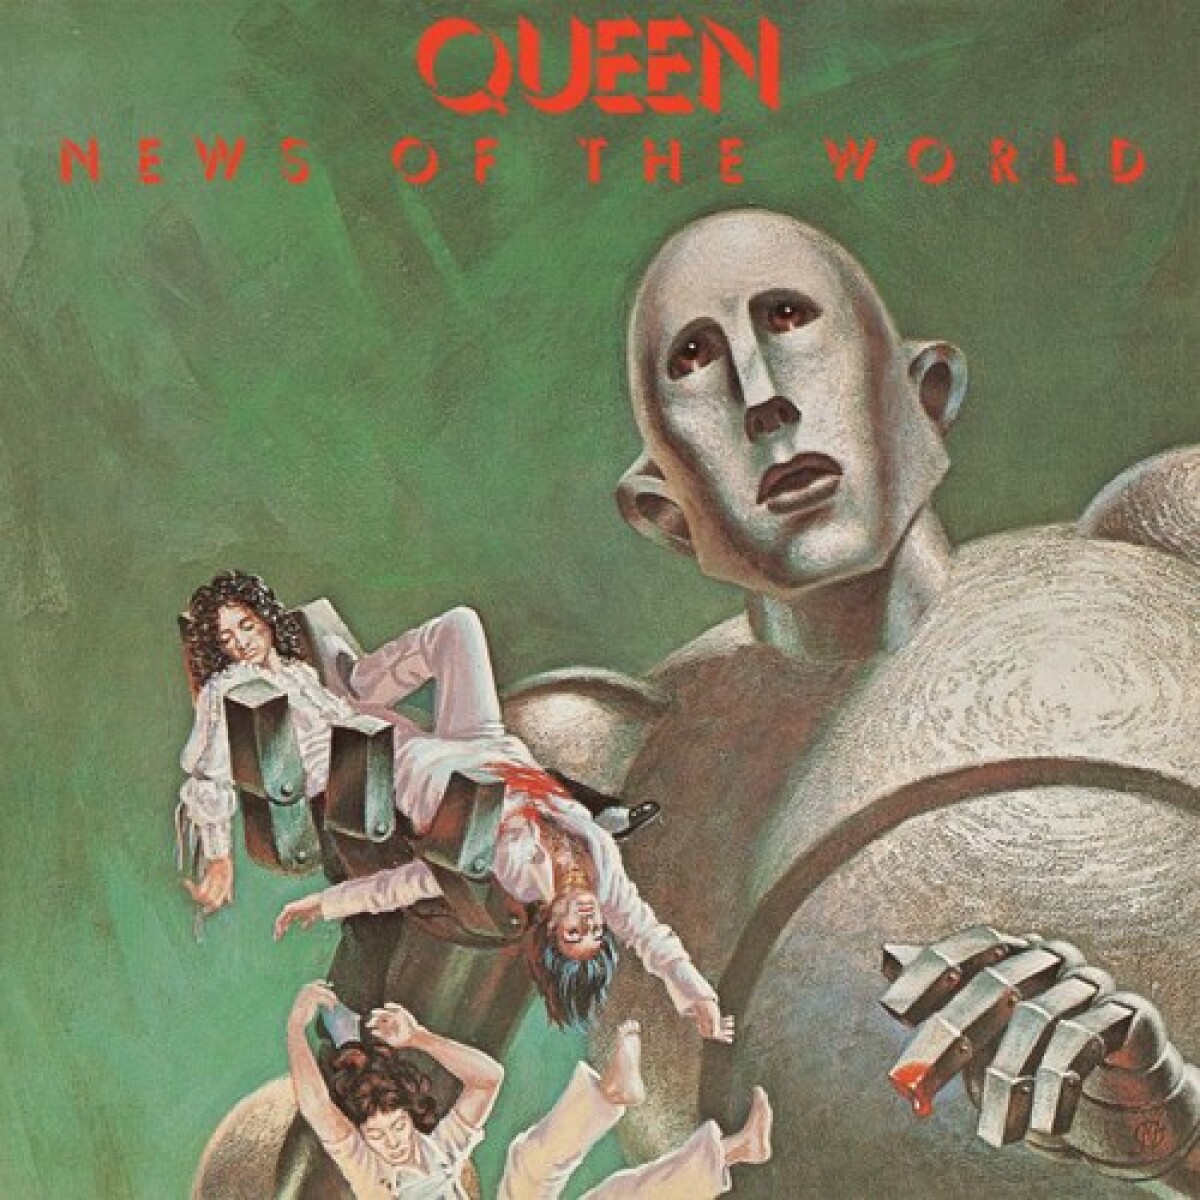 (c) Queen-news Of The World - Vinilo 